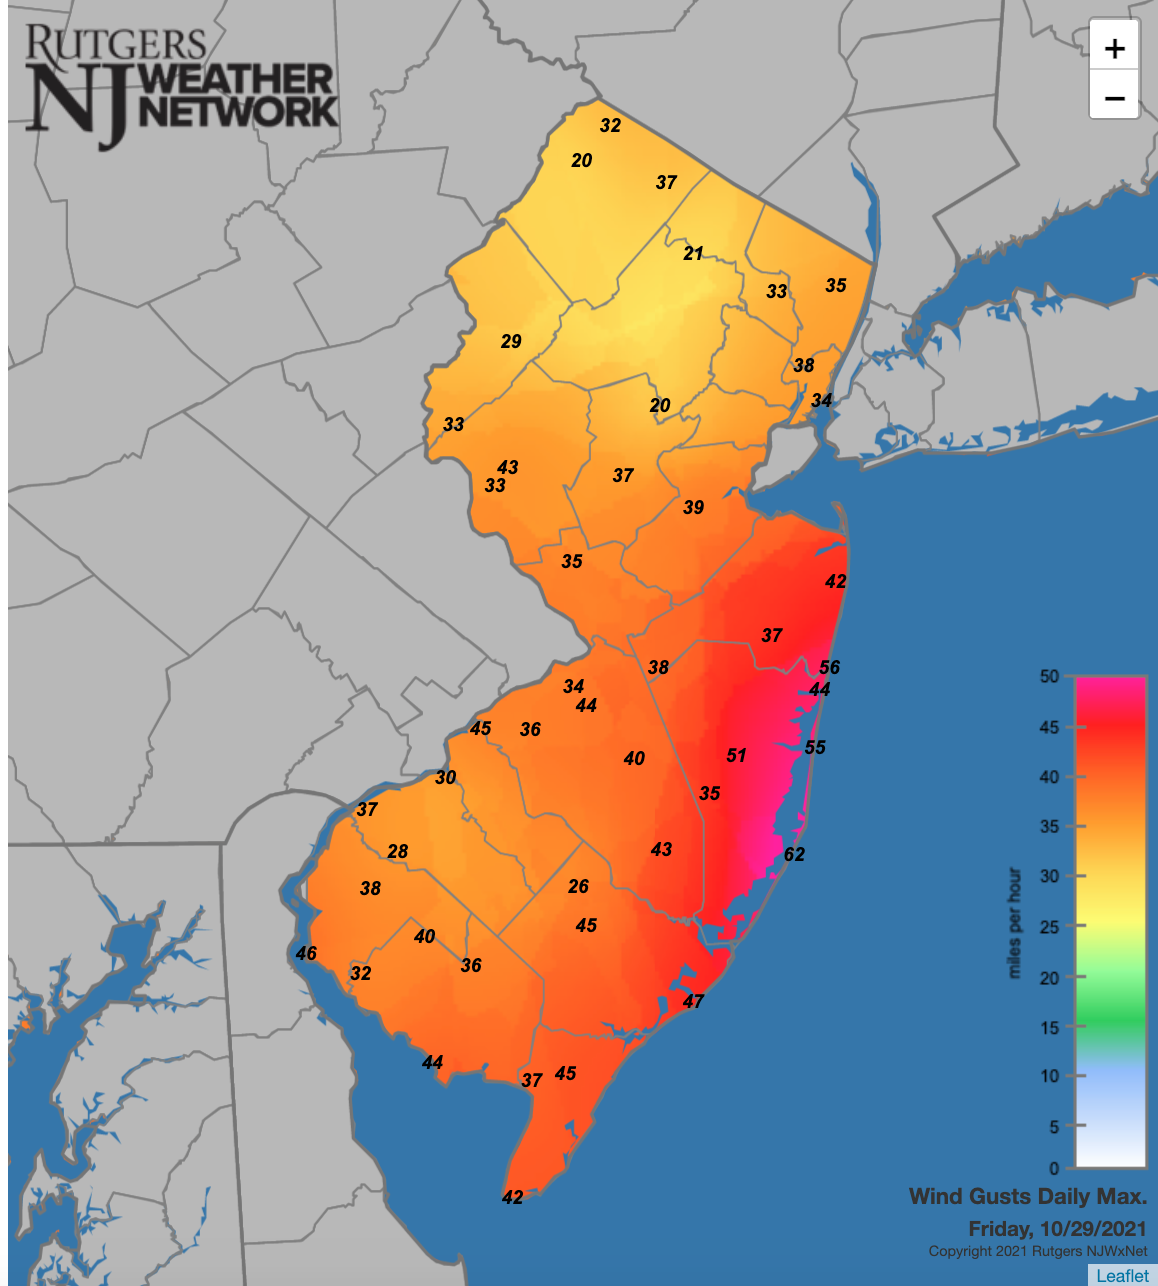 Maximum wind gusts at NJWxNet locations on October 29th.